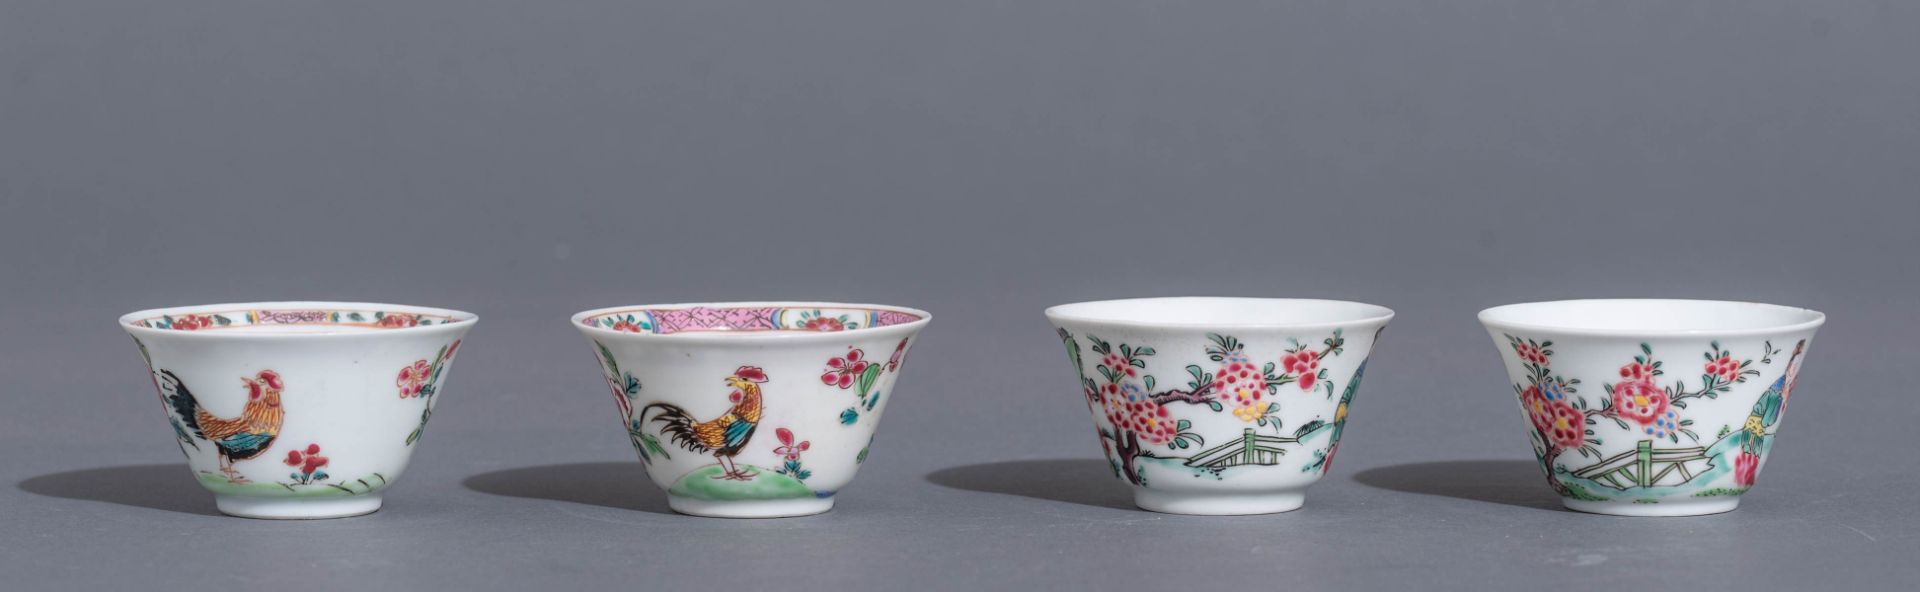 Four sets of Chinese famille rose export porcelain teacups and saucers - Image 10 of 13